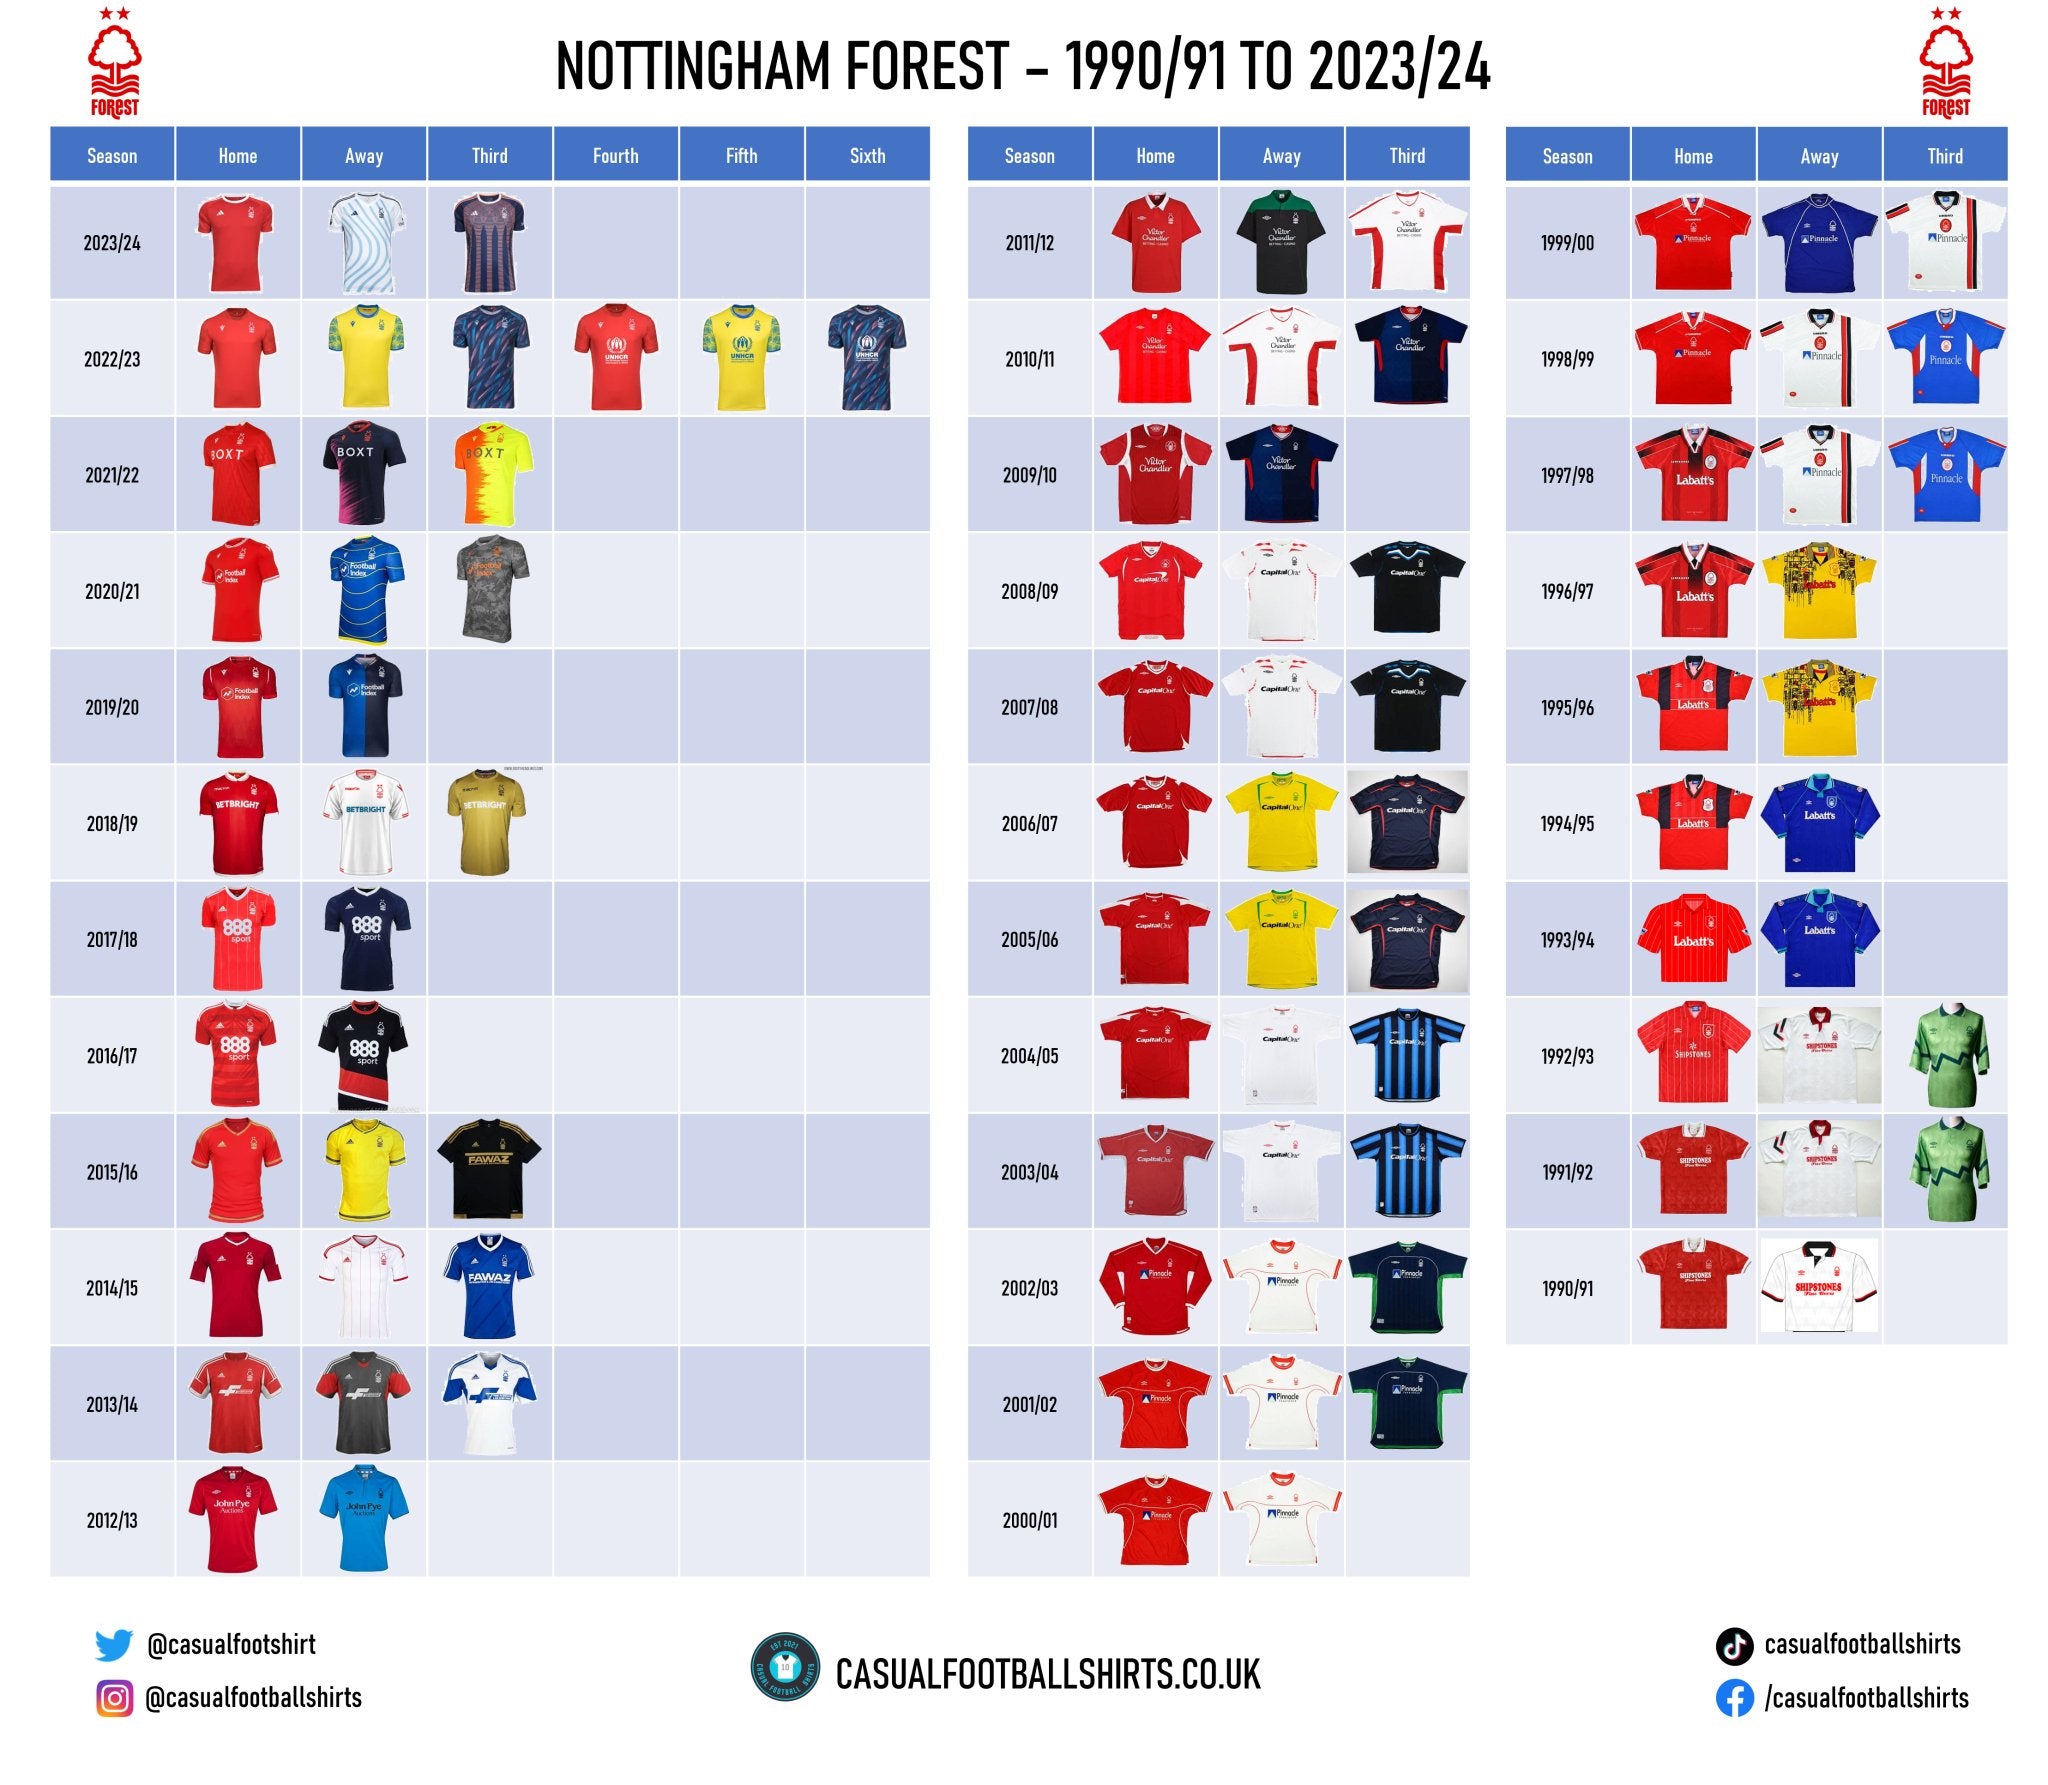 Checklist for Nottingham Forest shirts from 1990 to the current season